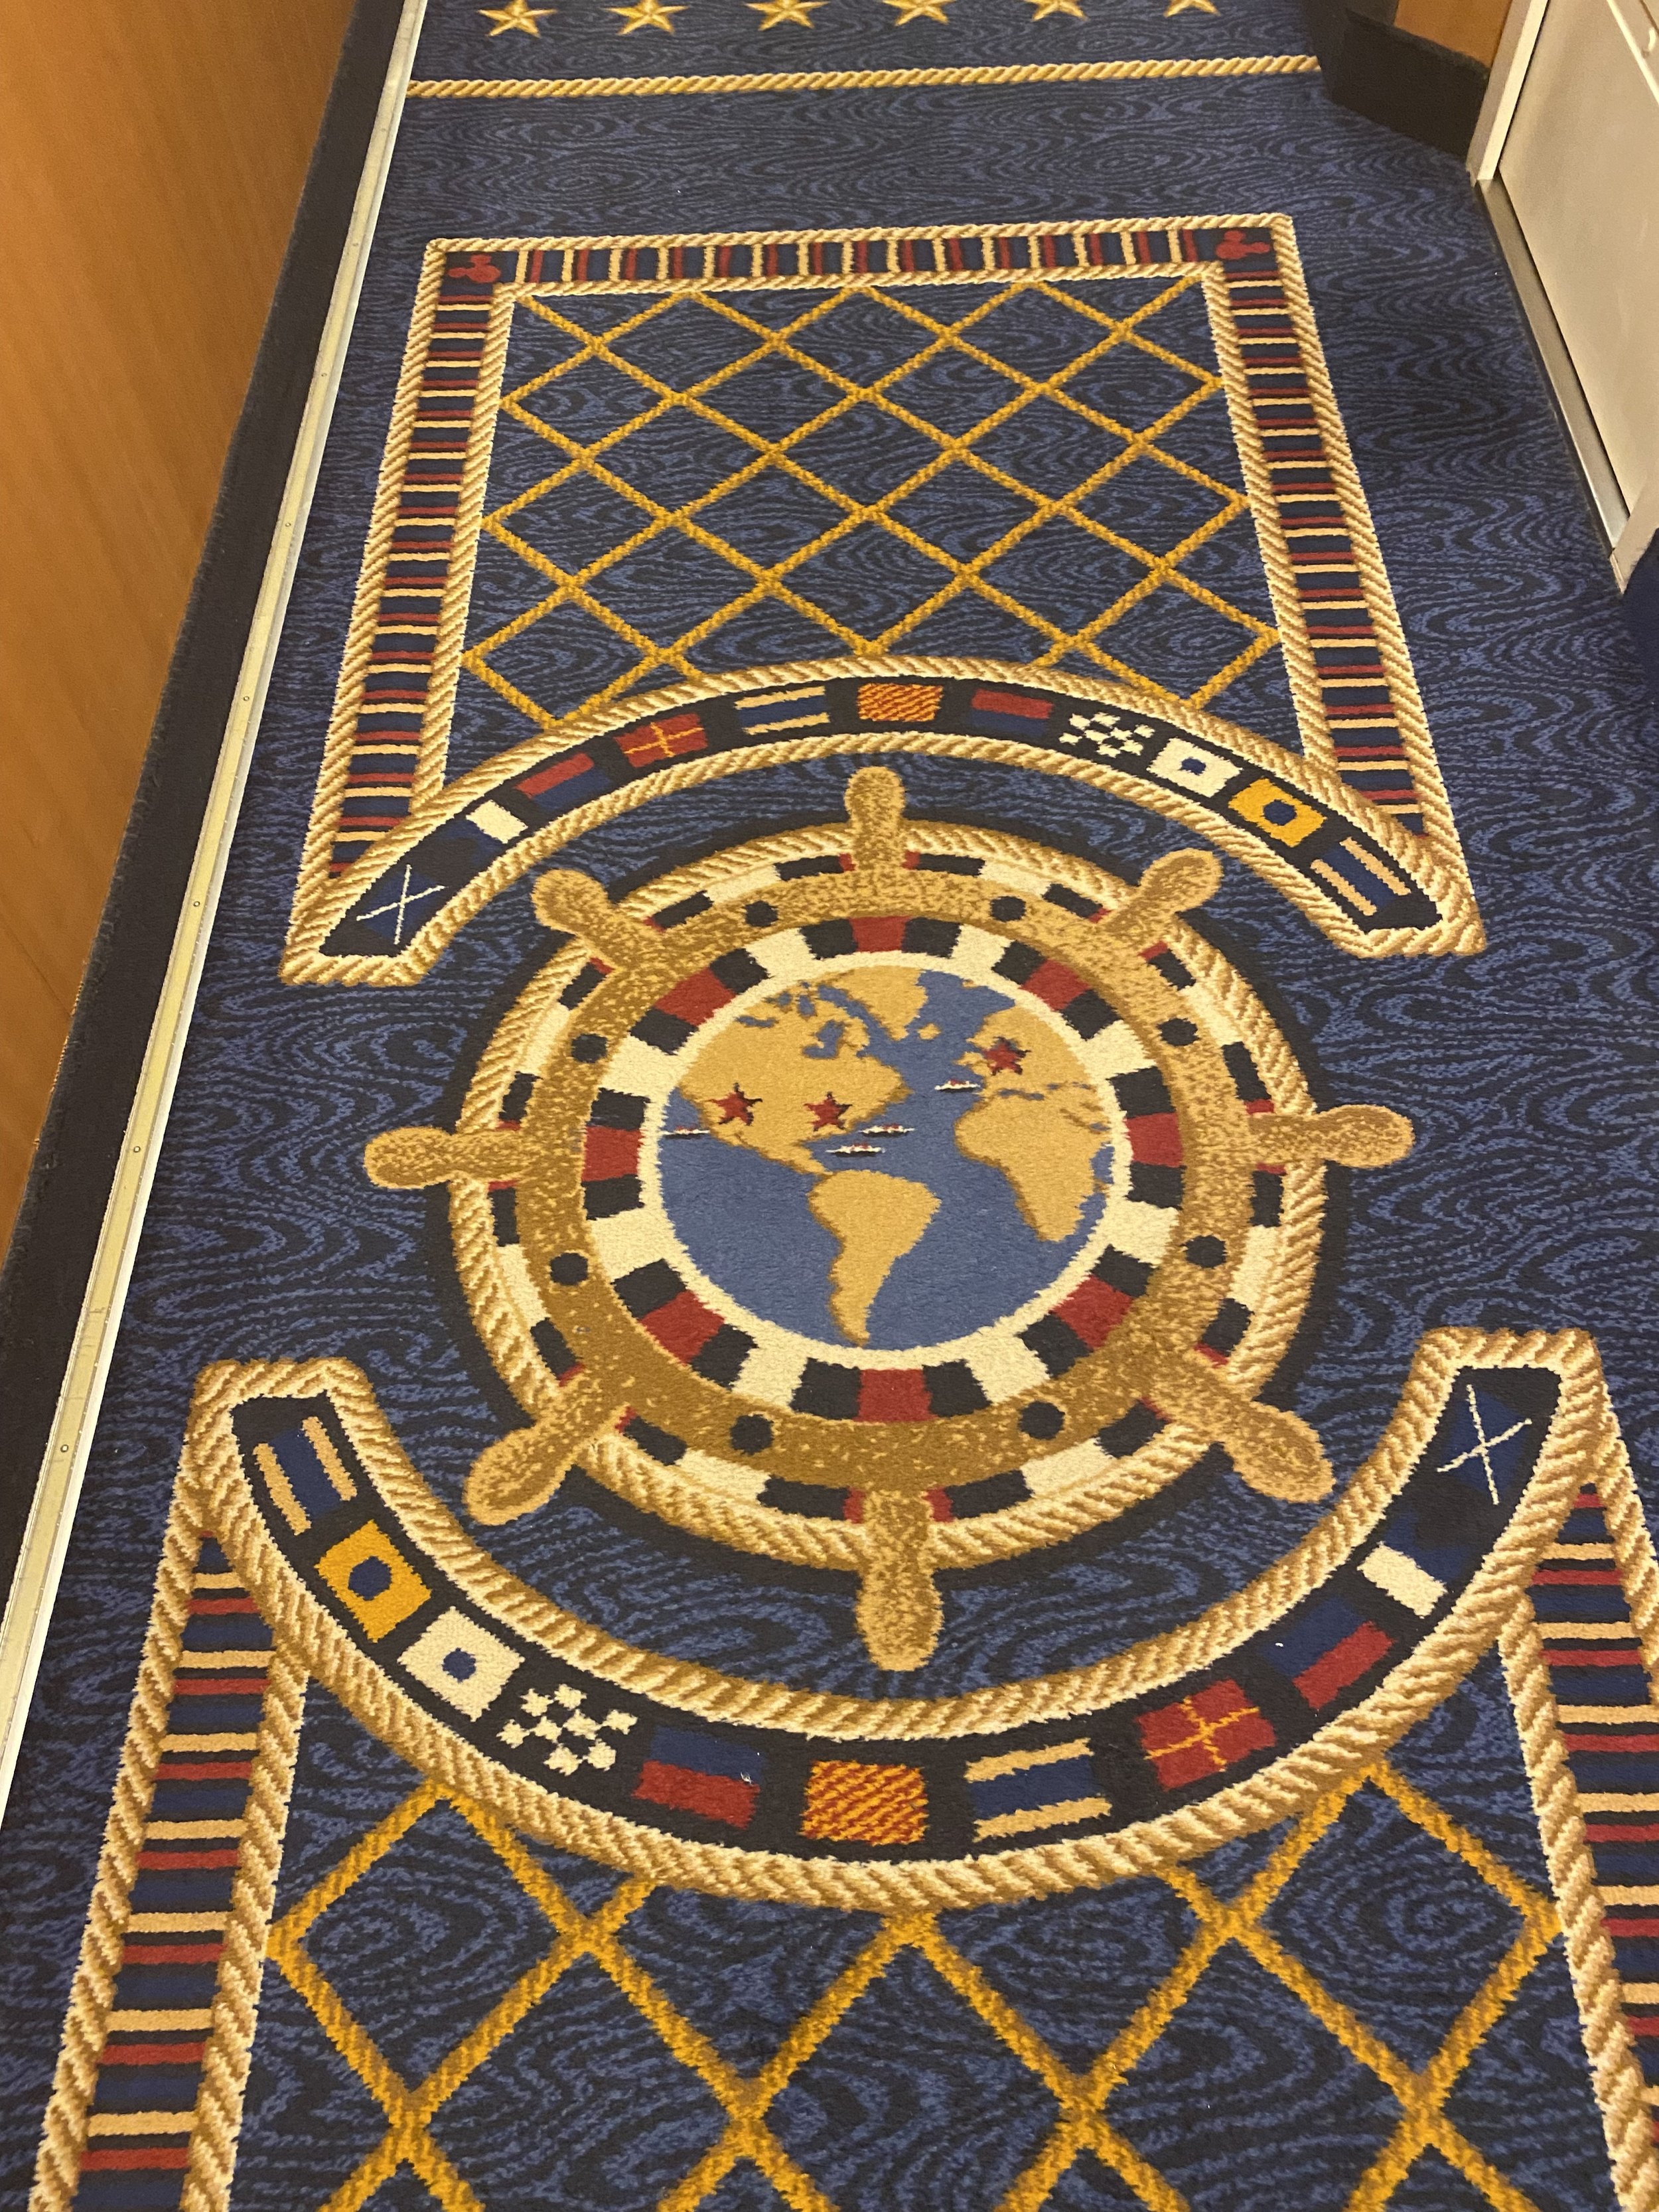   Fun fact:  the carpet in the hallways help tell guests and crew where they are, and where they are going. For example, if the map is facing you,  you’re walking toward the front of the ship (forward). If the map is upside down, you’re walking towar